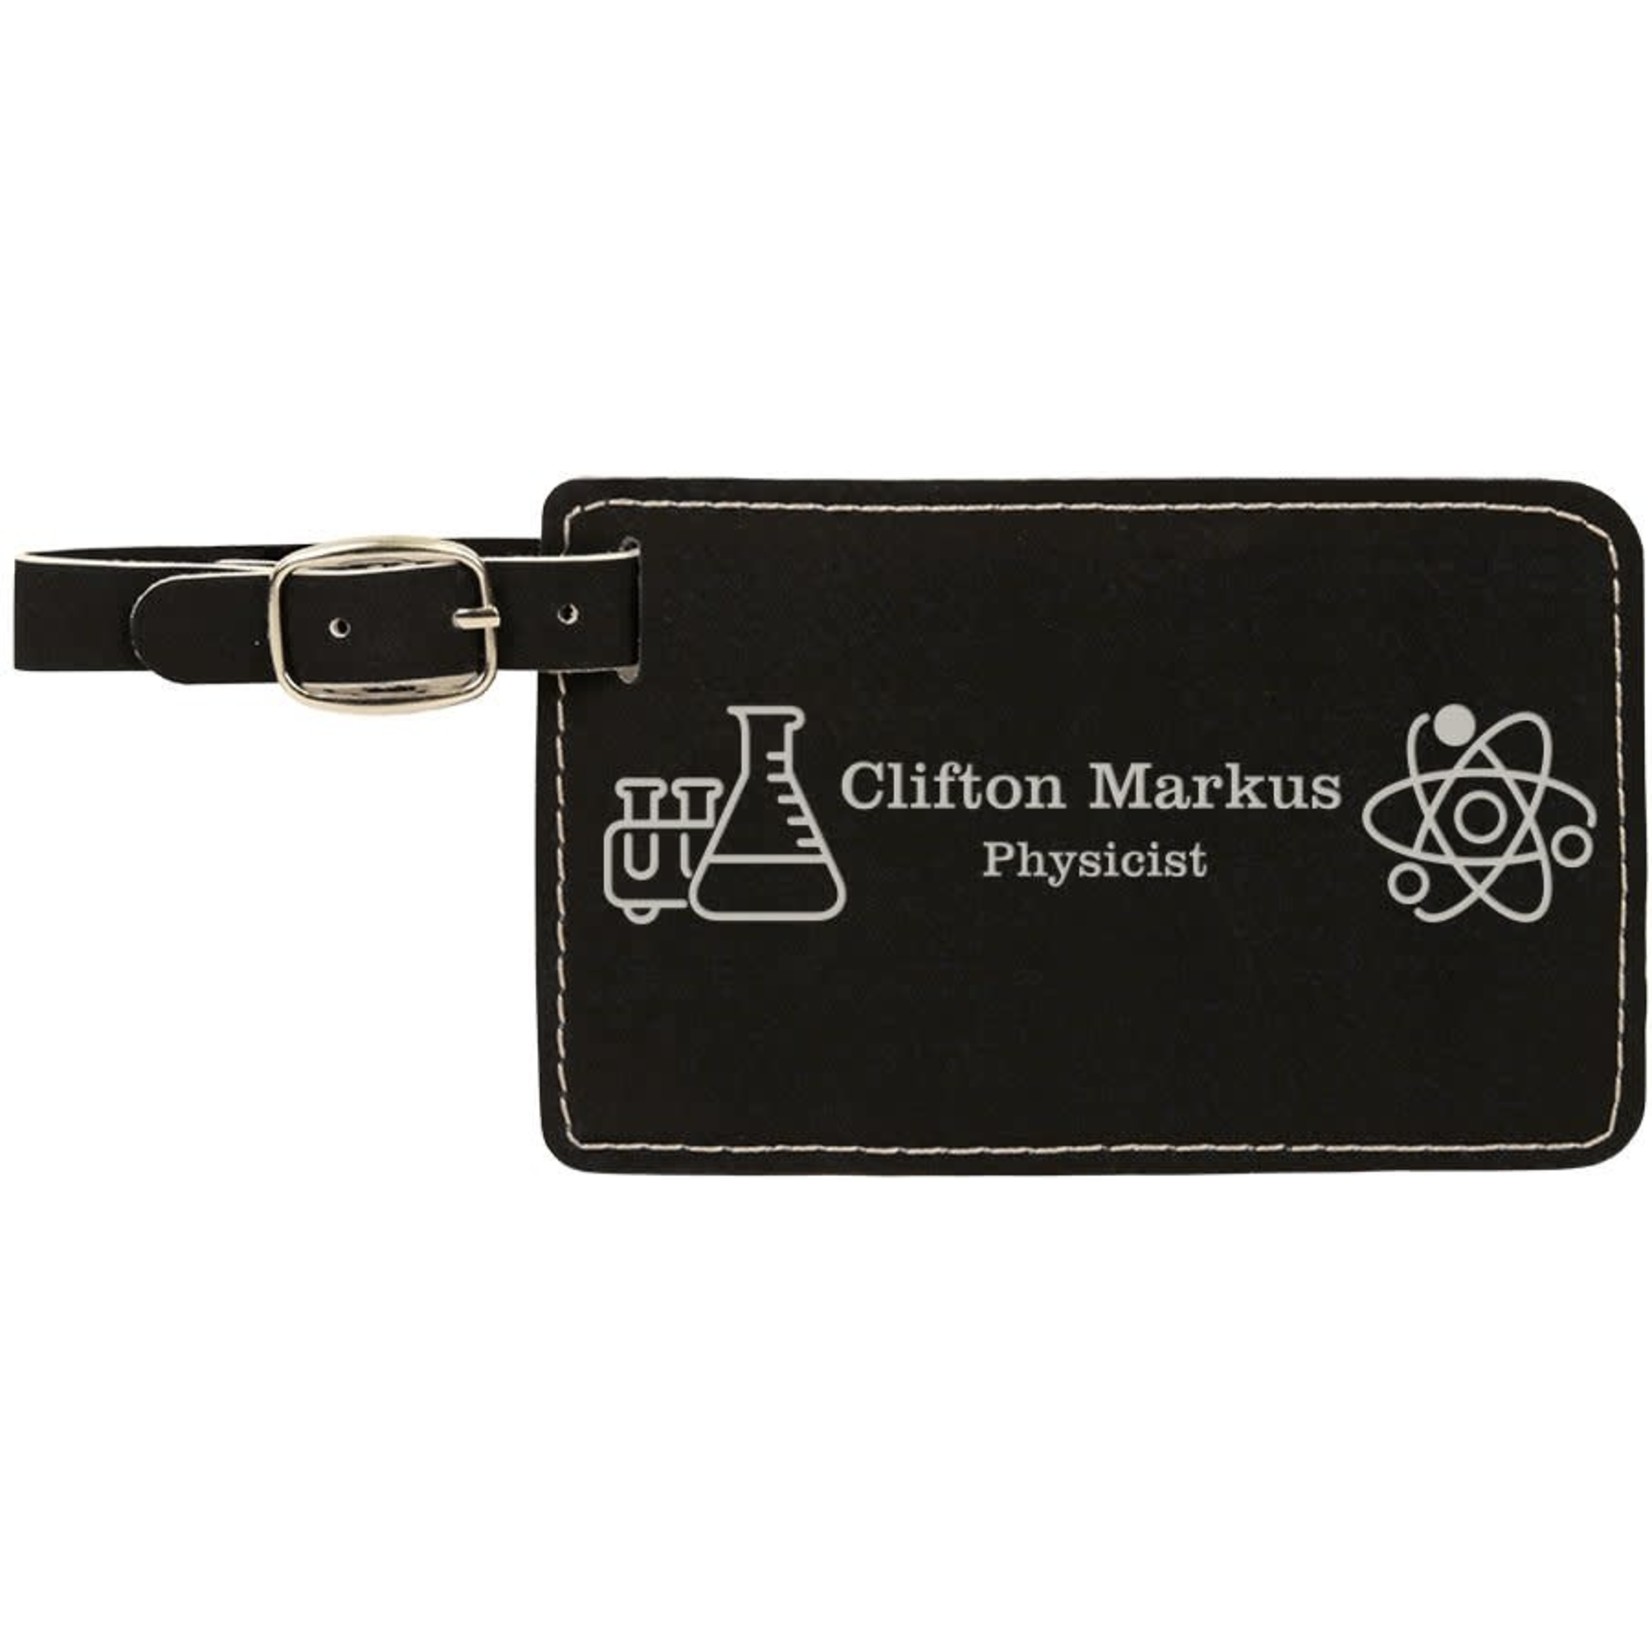 JDS Industries GFT243A Luggage Tags AVailable in Black w/gold, black w/ silver, rustic, blue, teal